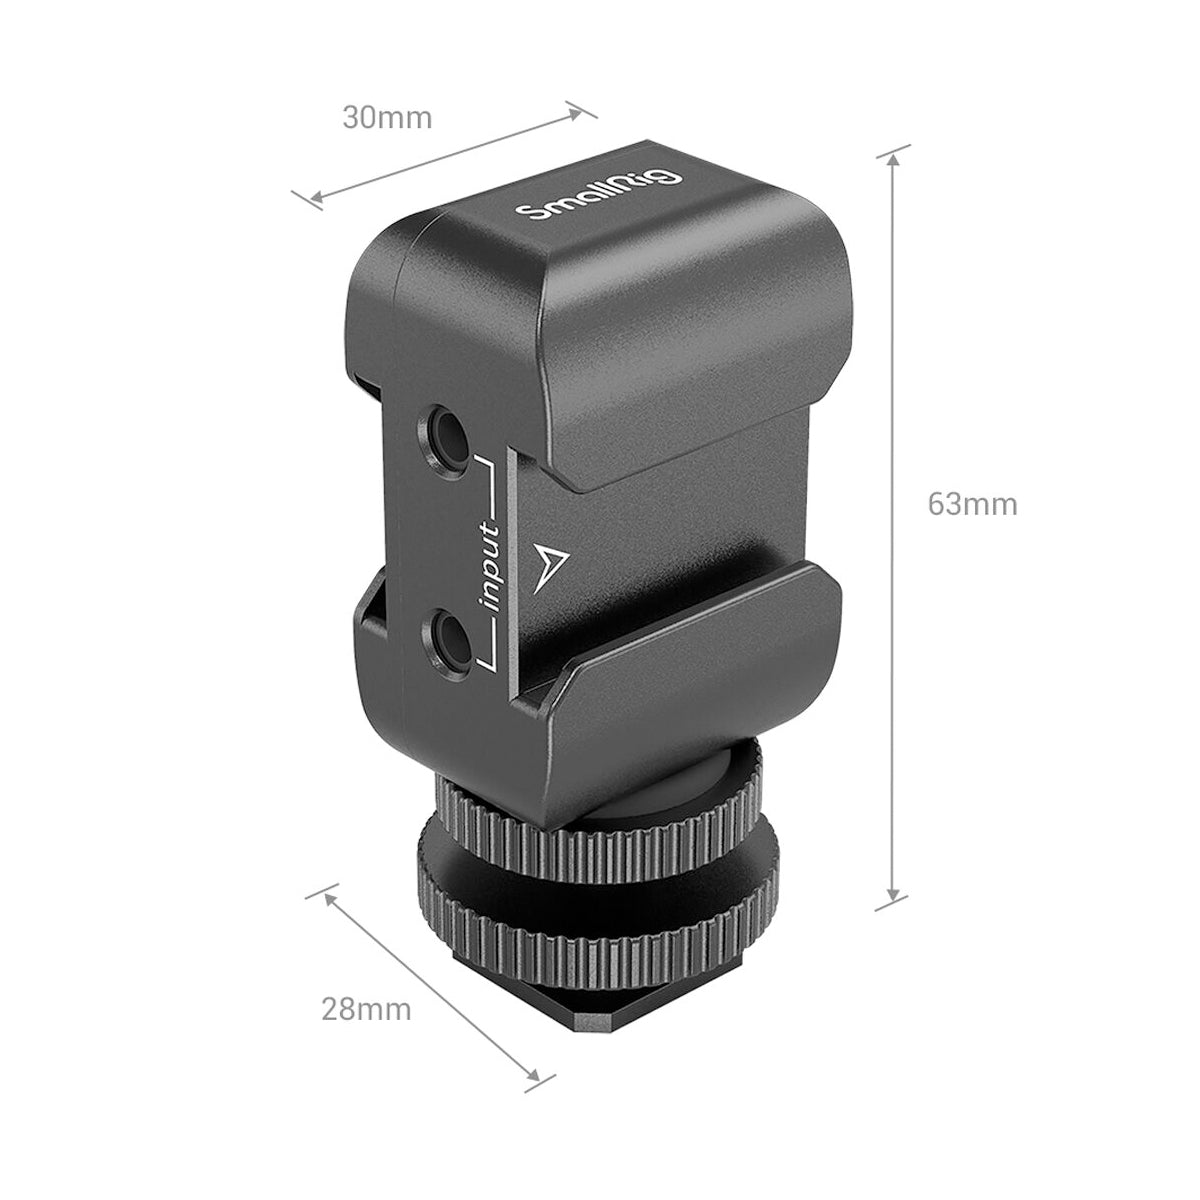 SmallRig Two-in-One Bracket for Wireless Microphone